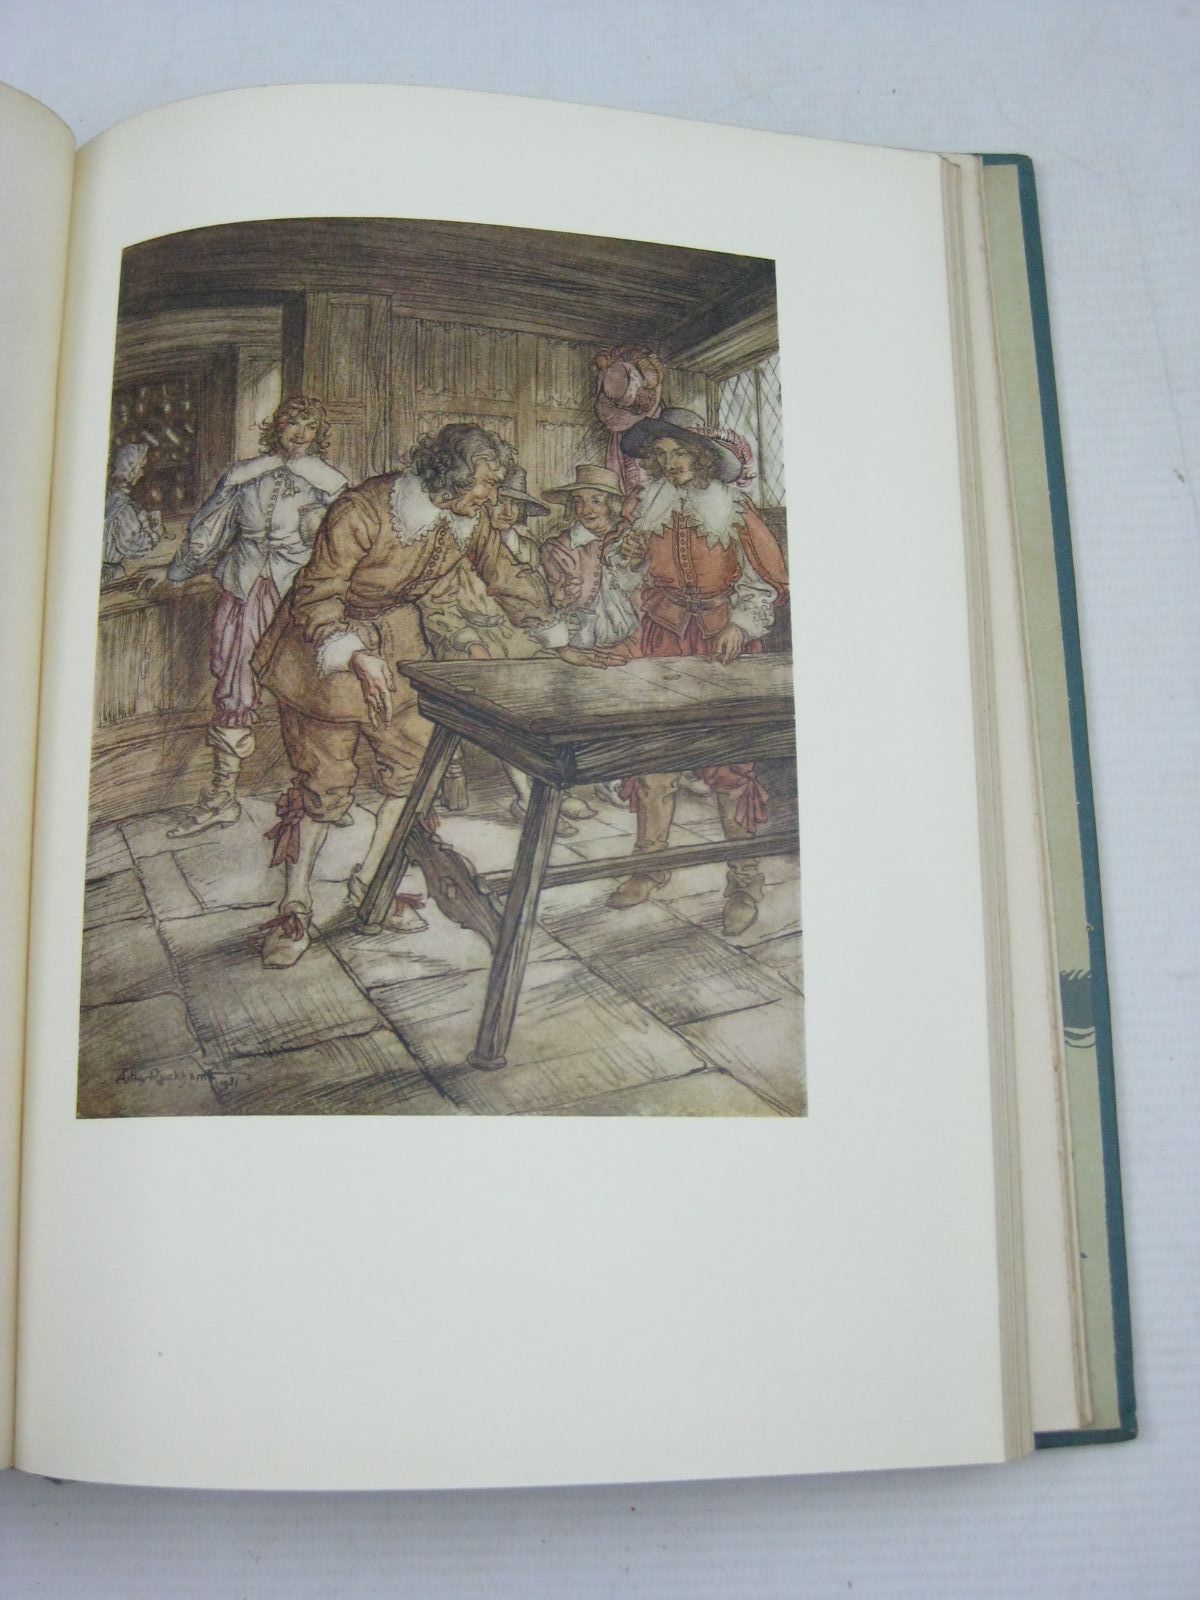 Photo of THE COMPLEAT ANGLER written by Walton, Izaak illustrated by Rackham, Arthur published by George G. Harrap & Co. Ltd. (STOCK CODE: 1315197)  for sale by Stella & Rose's Books